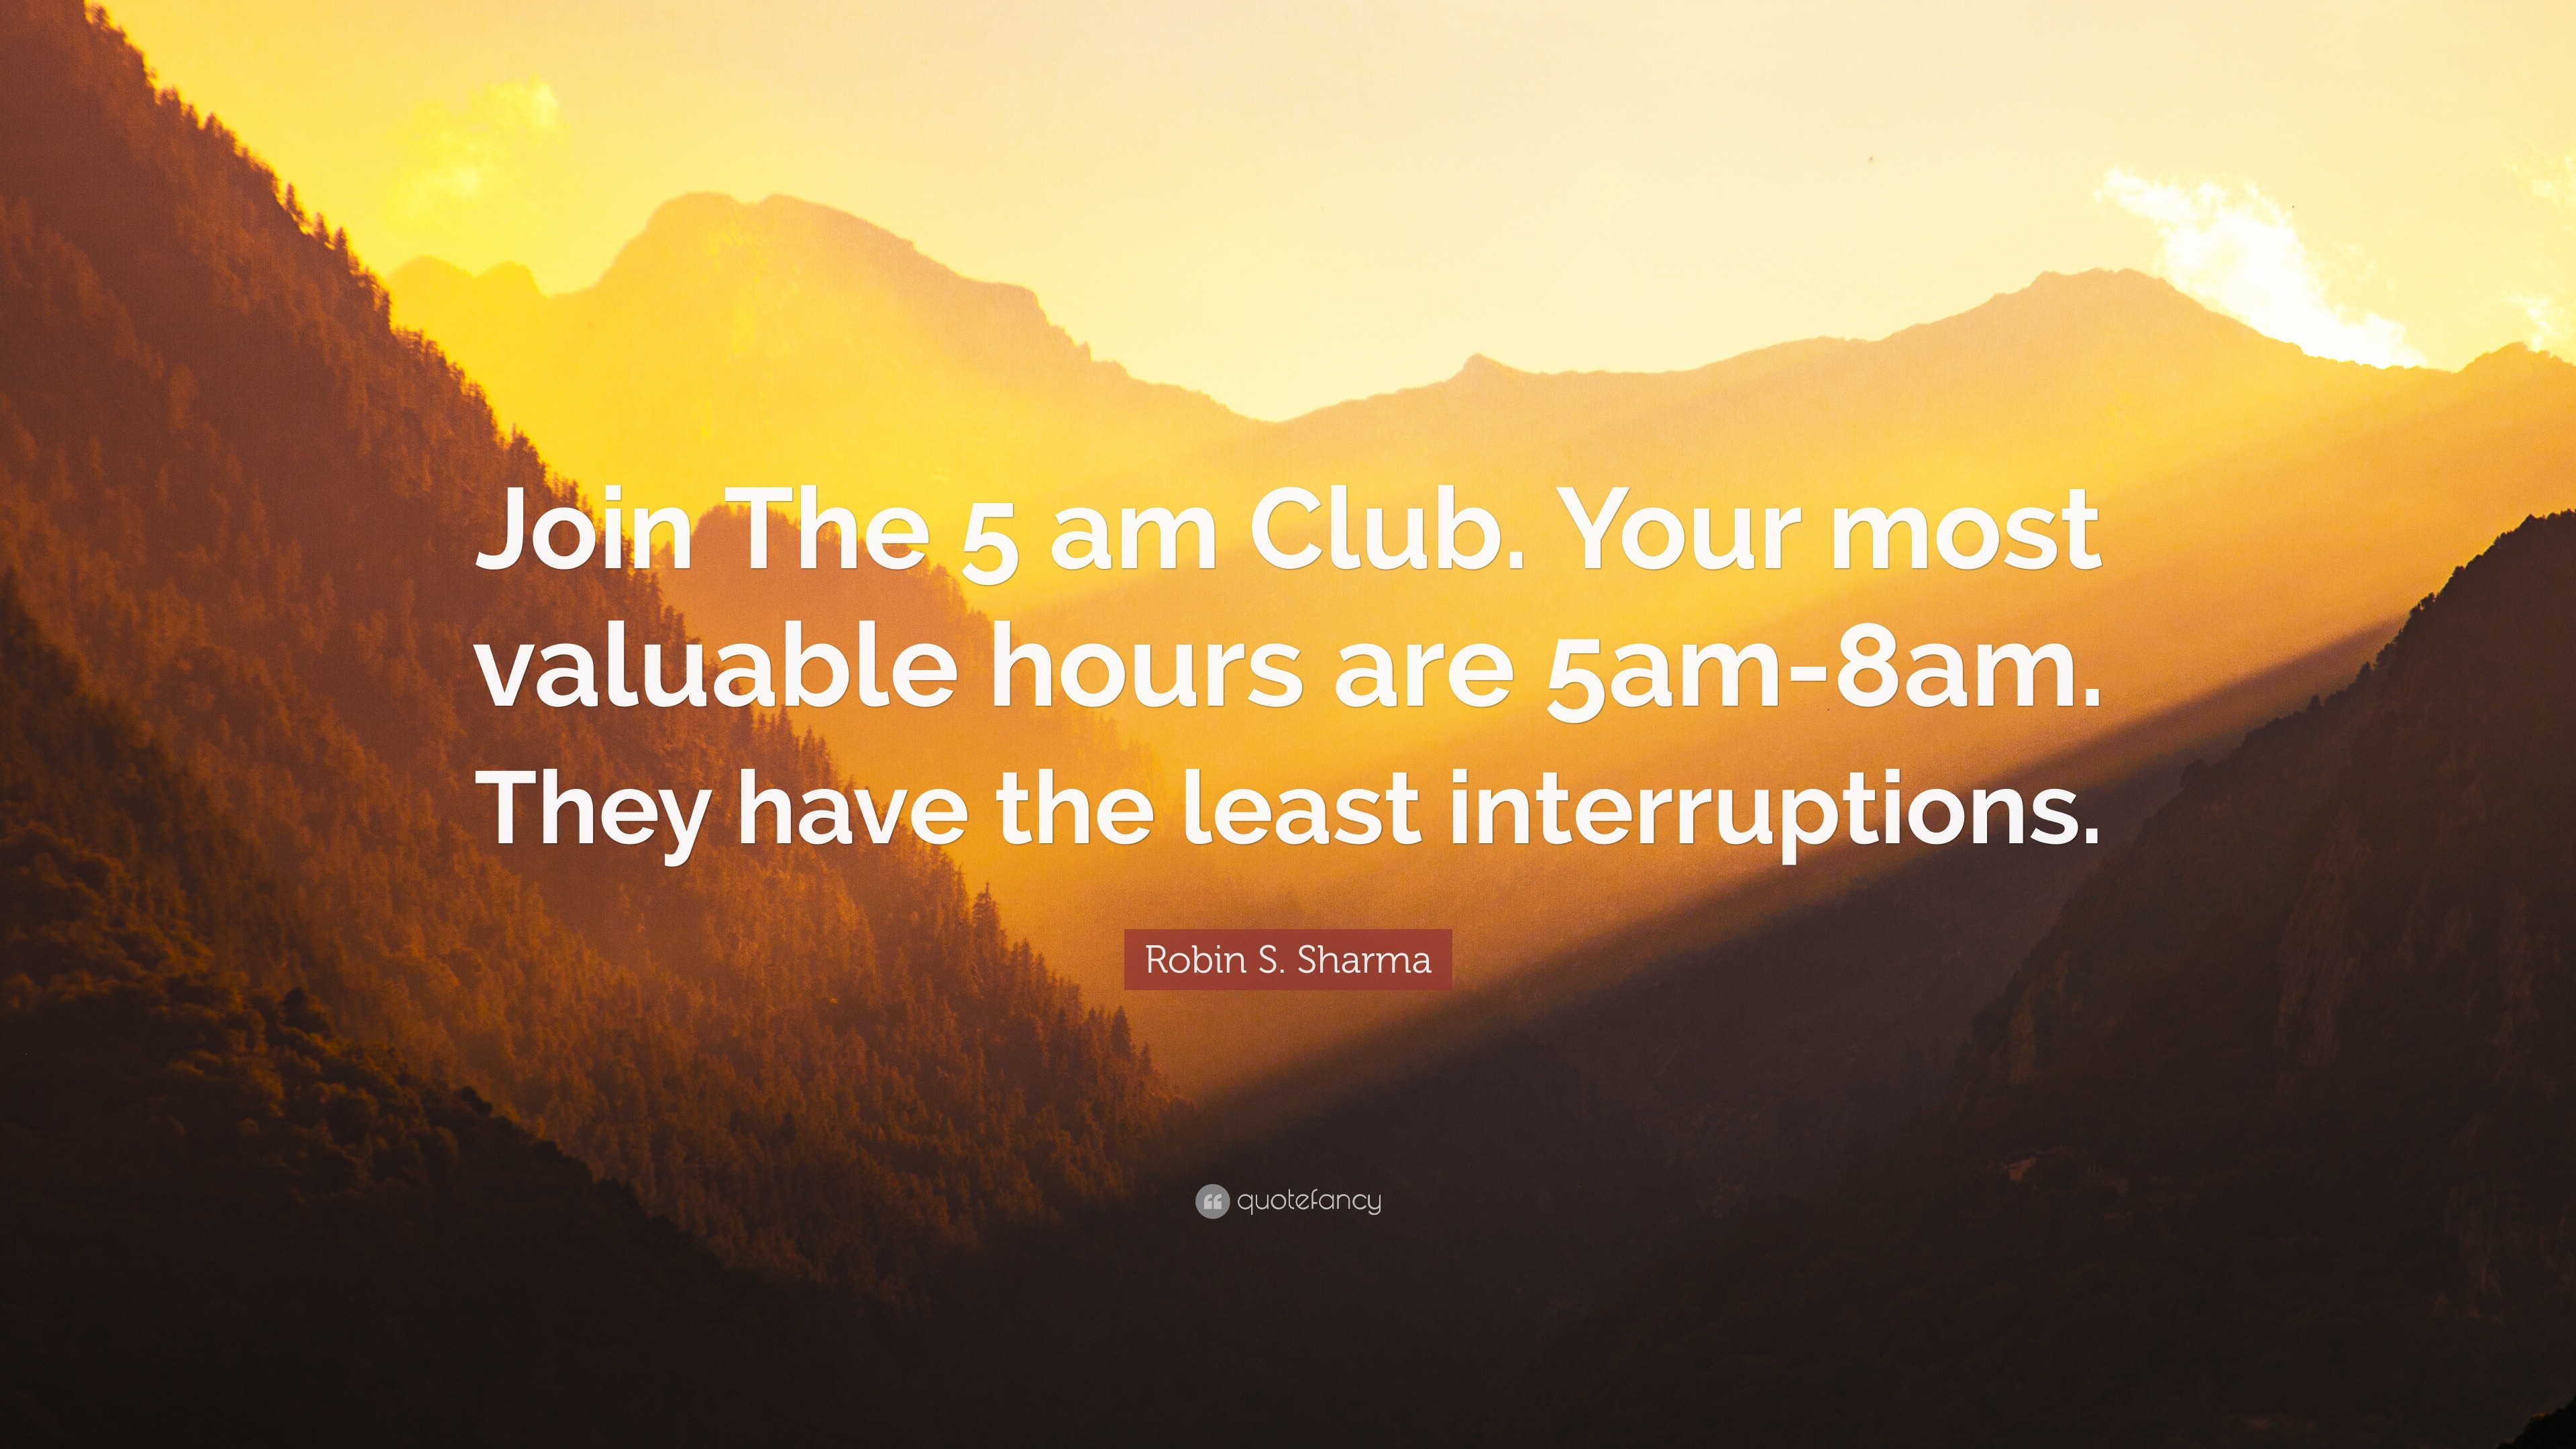 Robin S. Sharma Quote: “Join The 5 am Club. Your most valuable hours are 5am -8am.